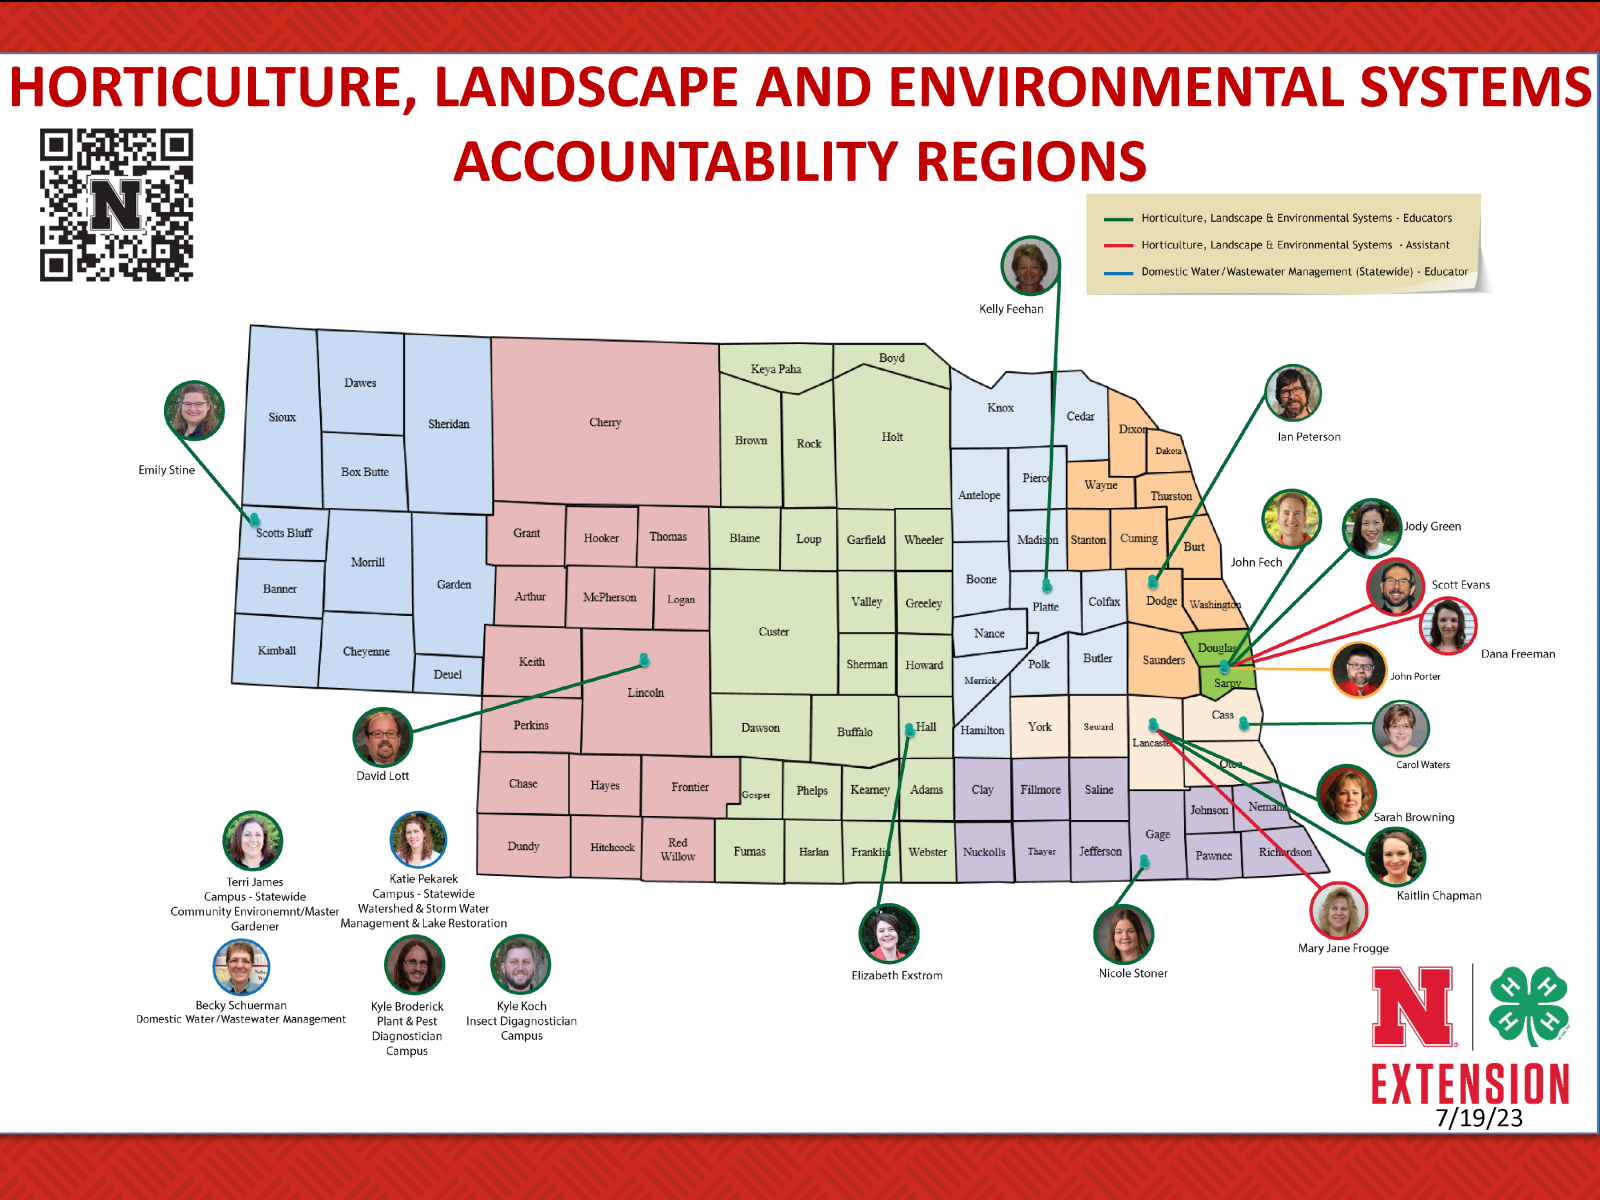 Map of Horticulture, Environmental and Landscape Systems Staff.